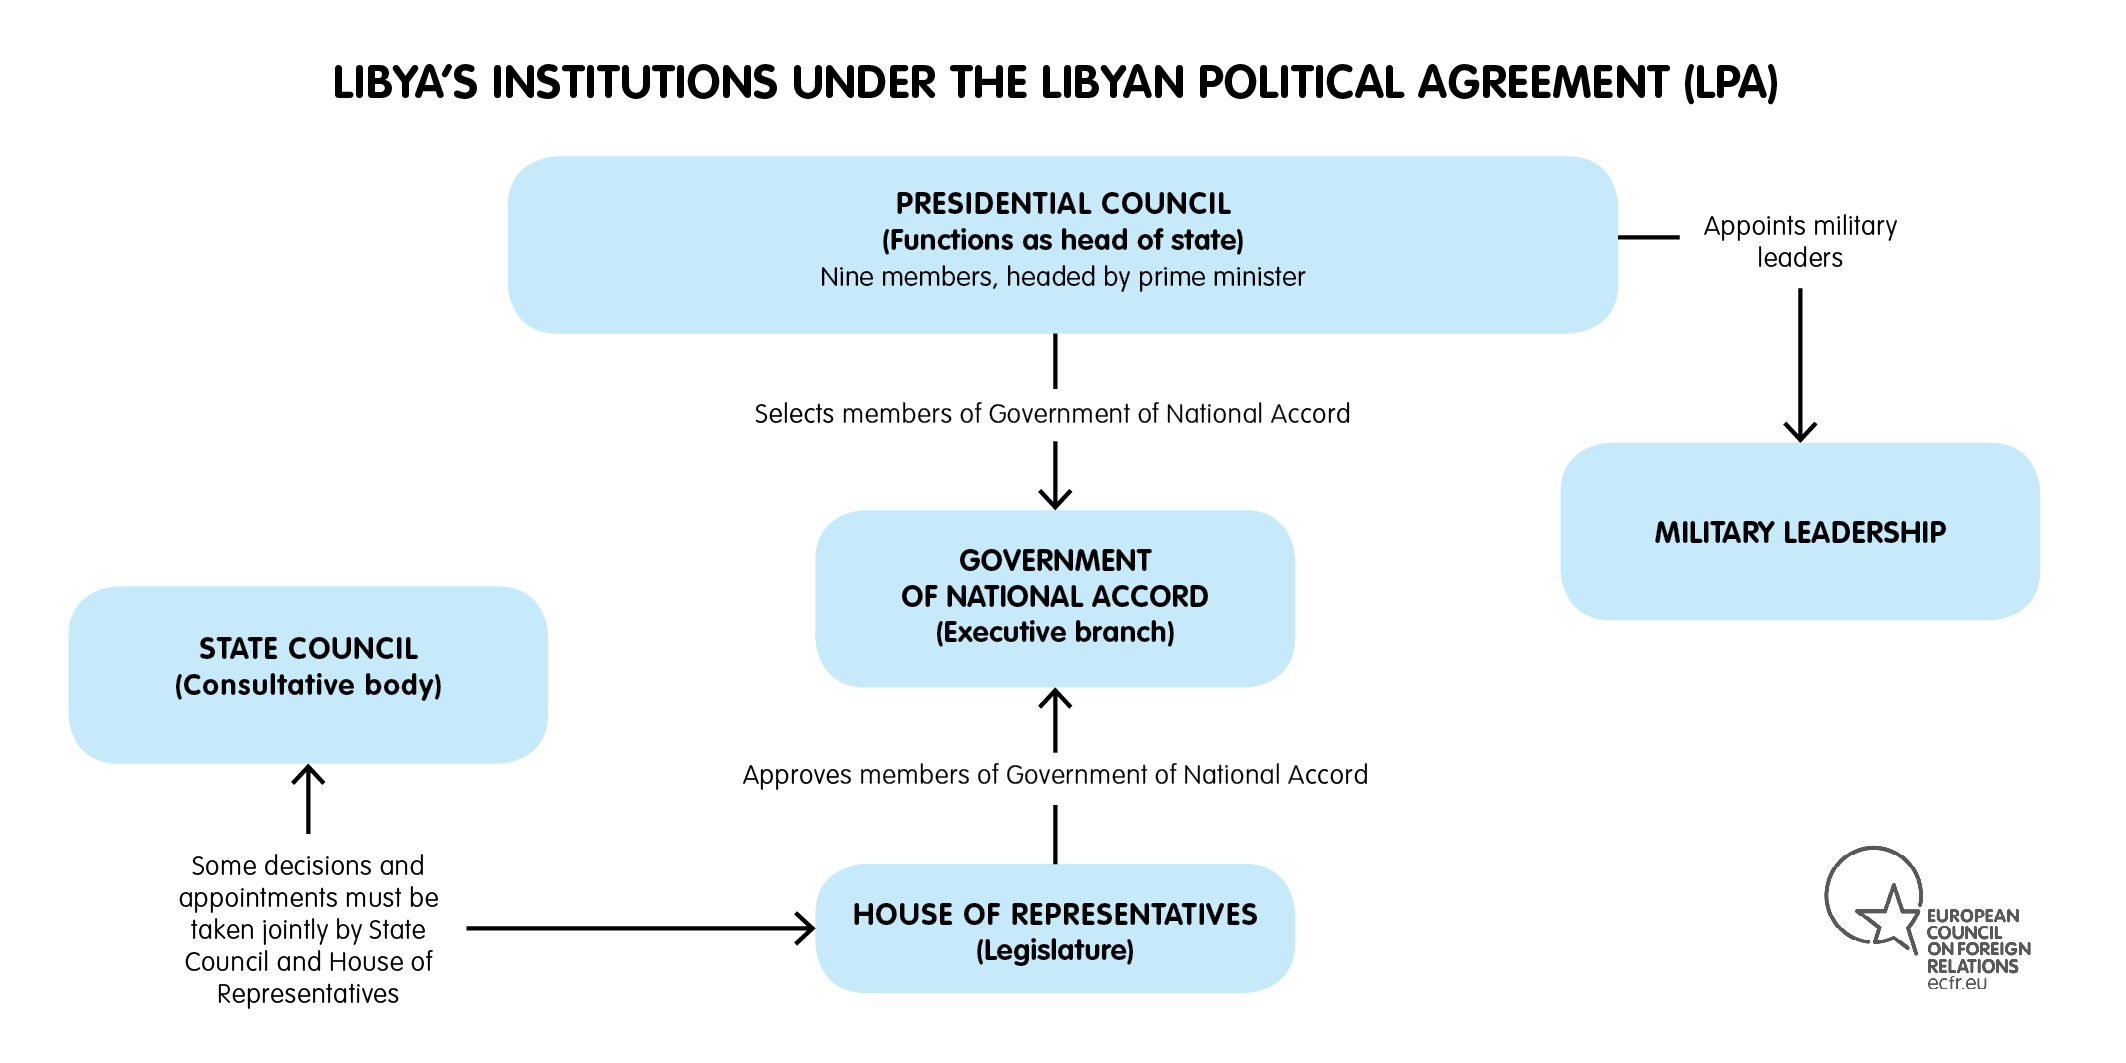 Map of Libya institutions under the LPA 2016